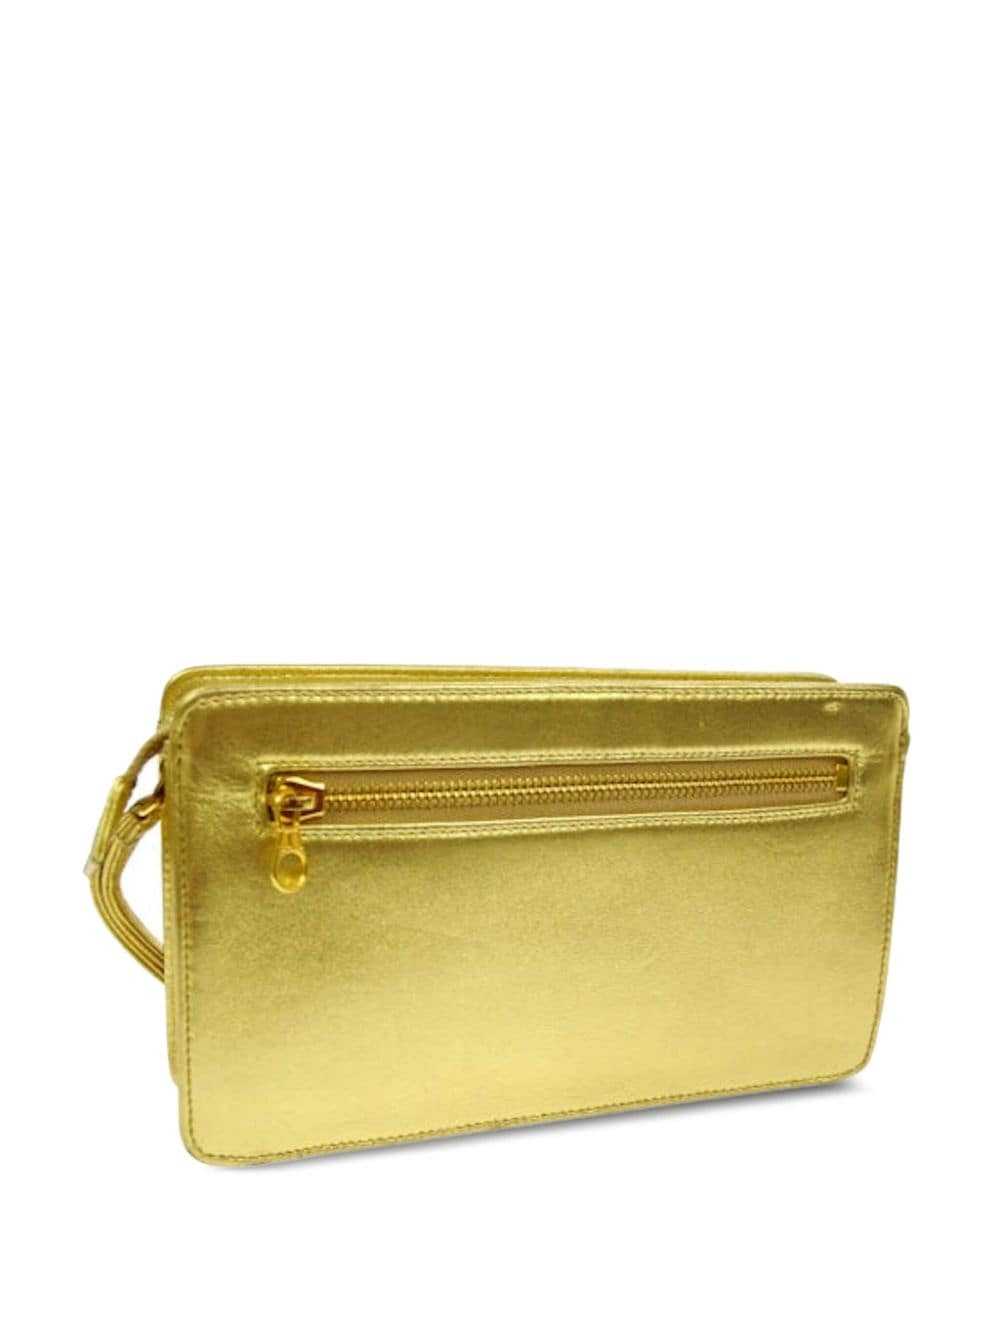 CHANEL Pre-Owned 1997 CC clutch bag - Gold - image 2